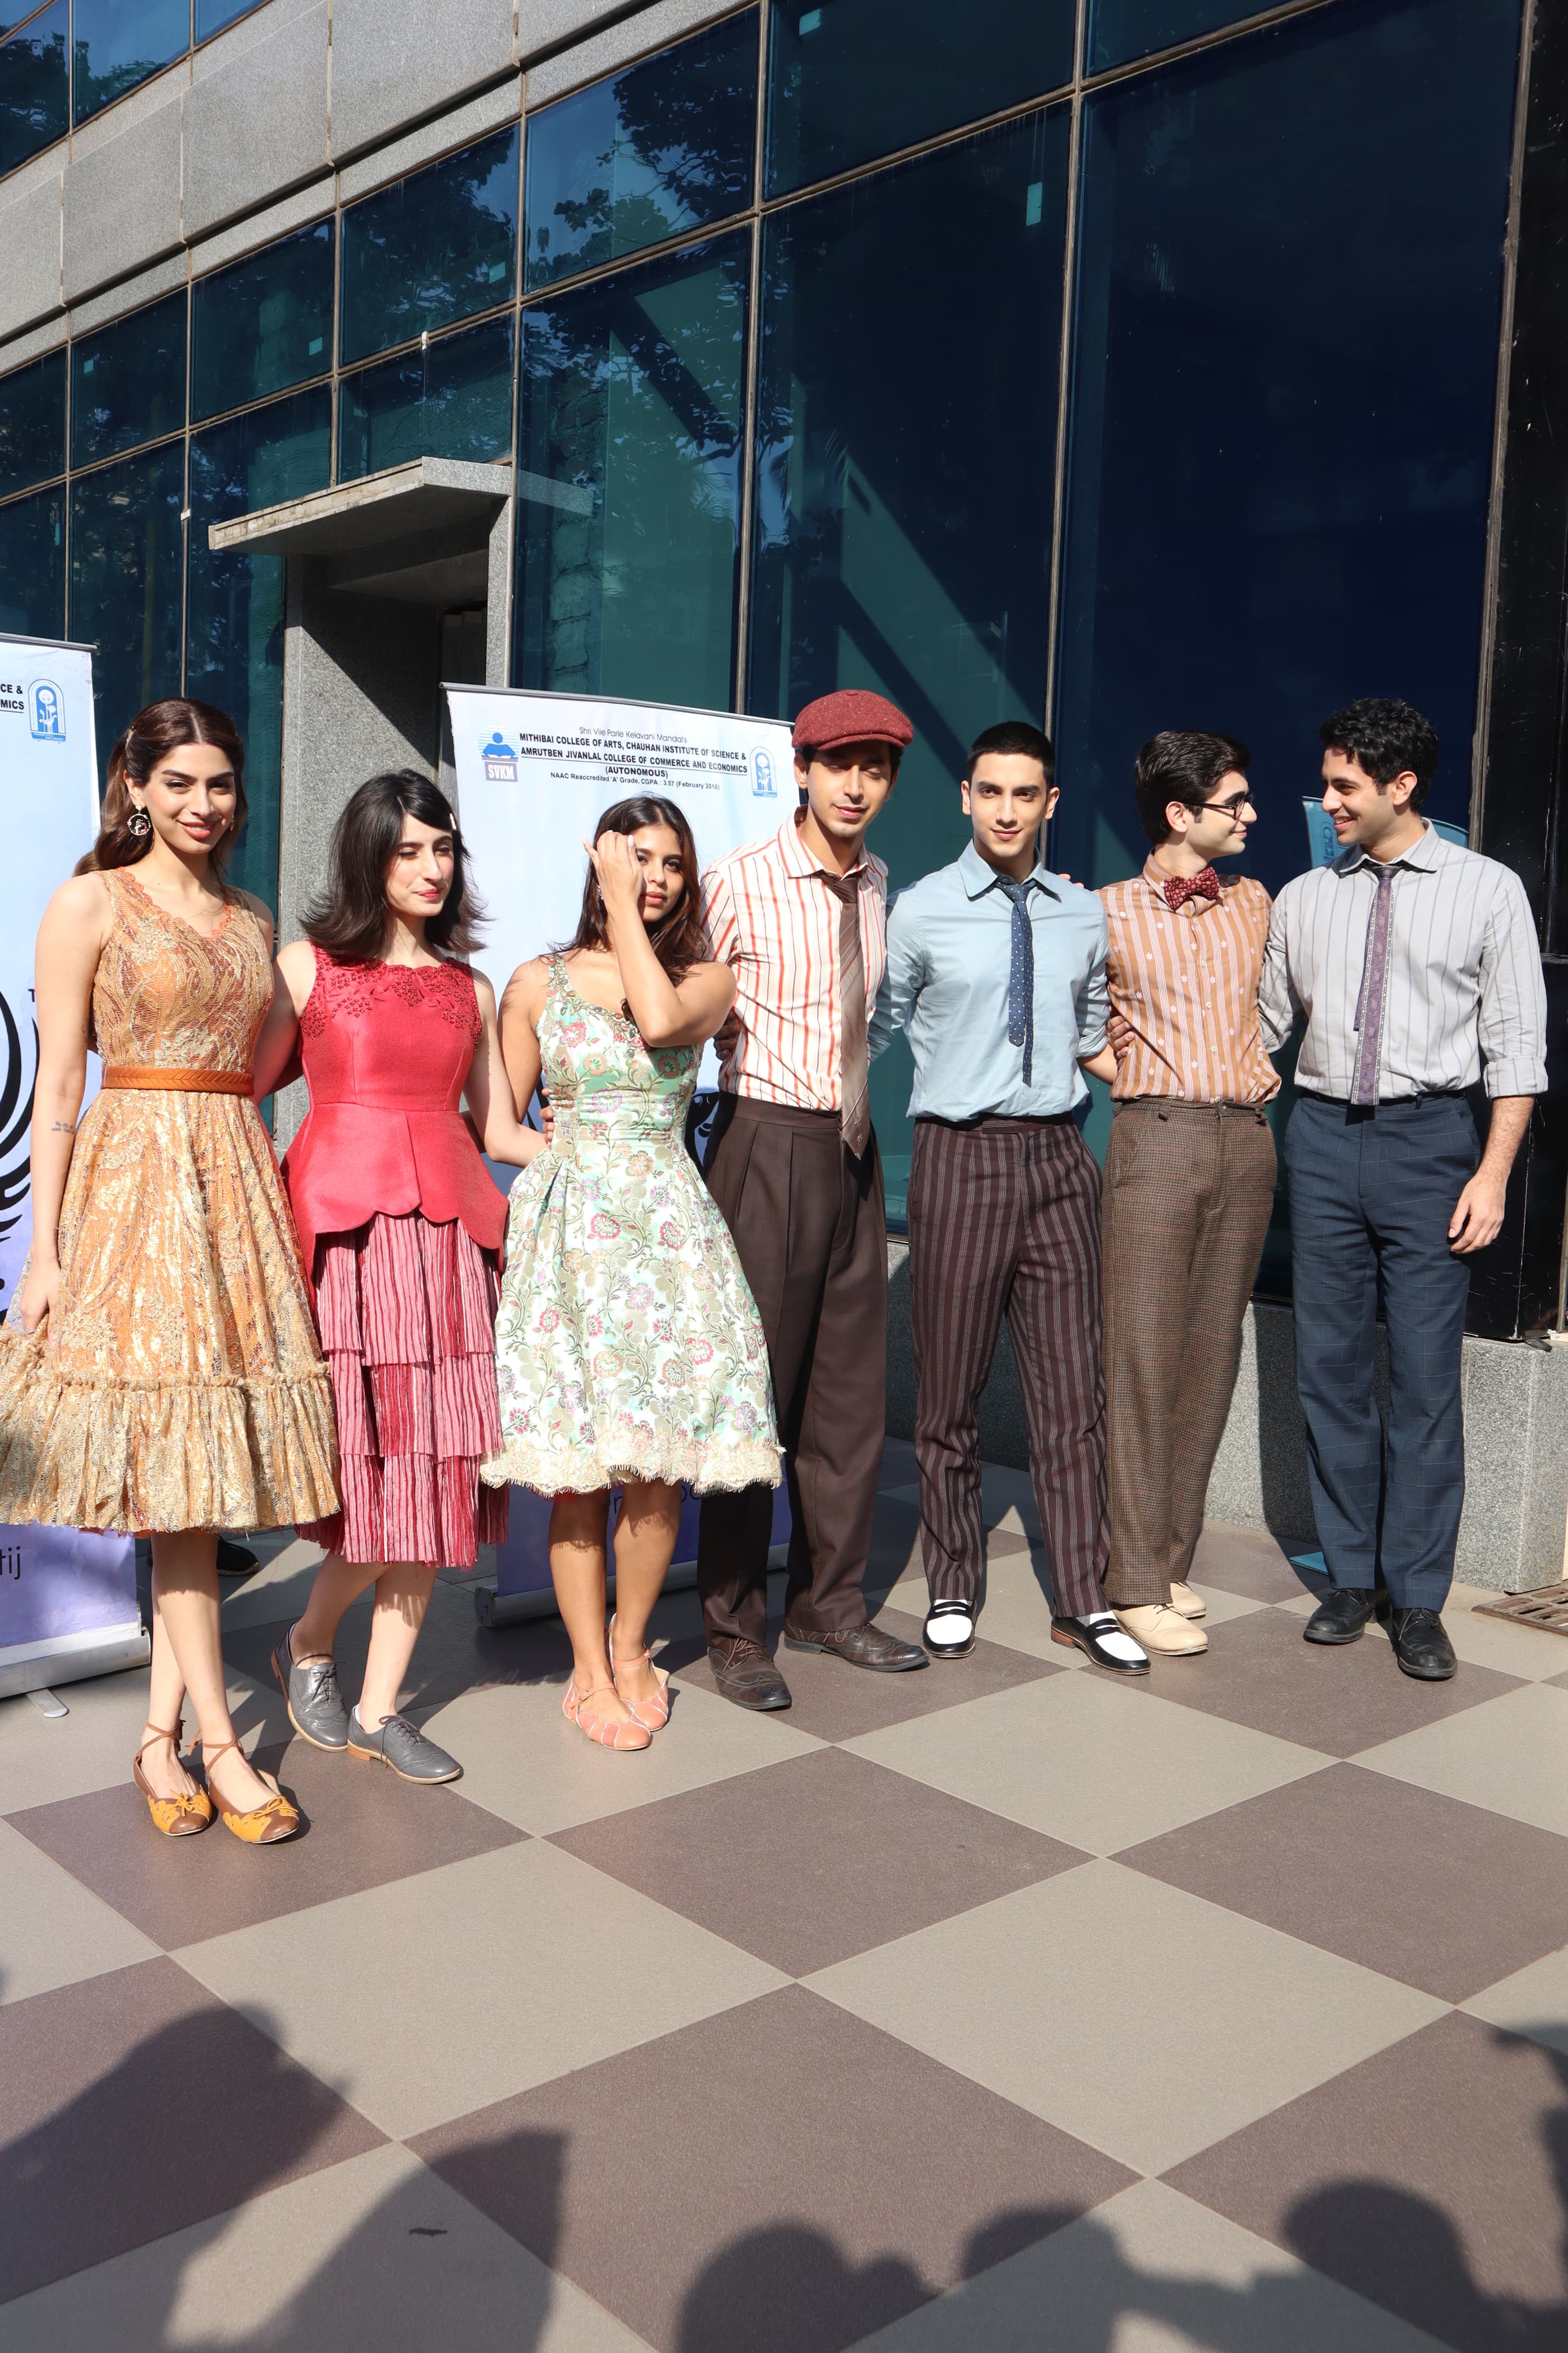 The cast of Archies reached Kshitij festival to promote their upcoming film